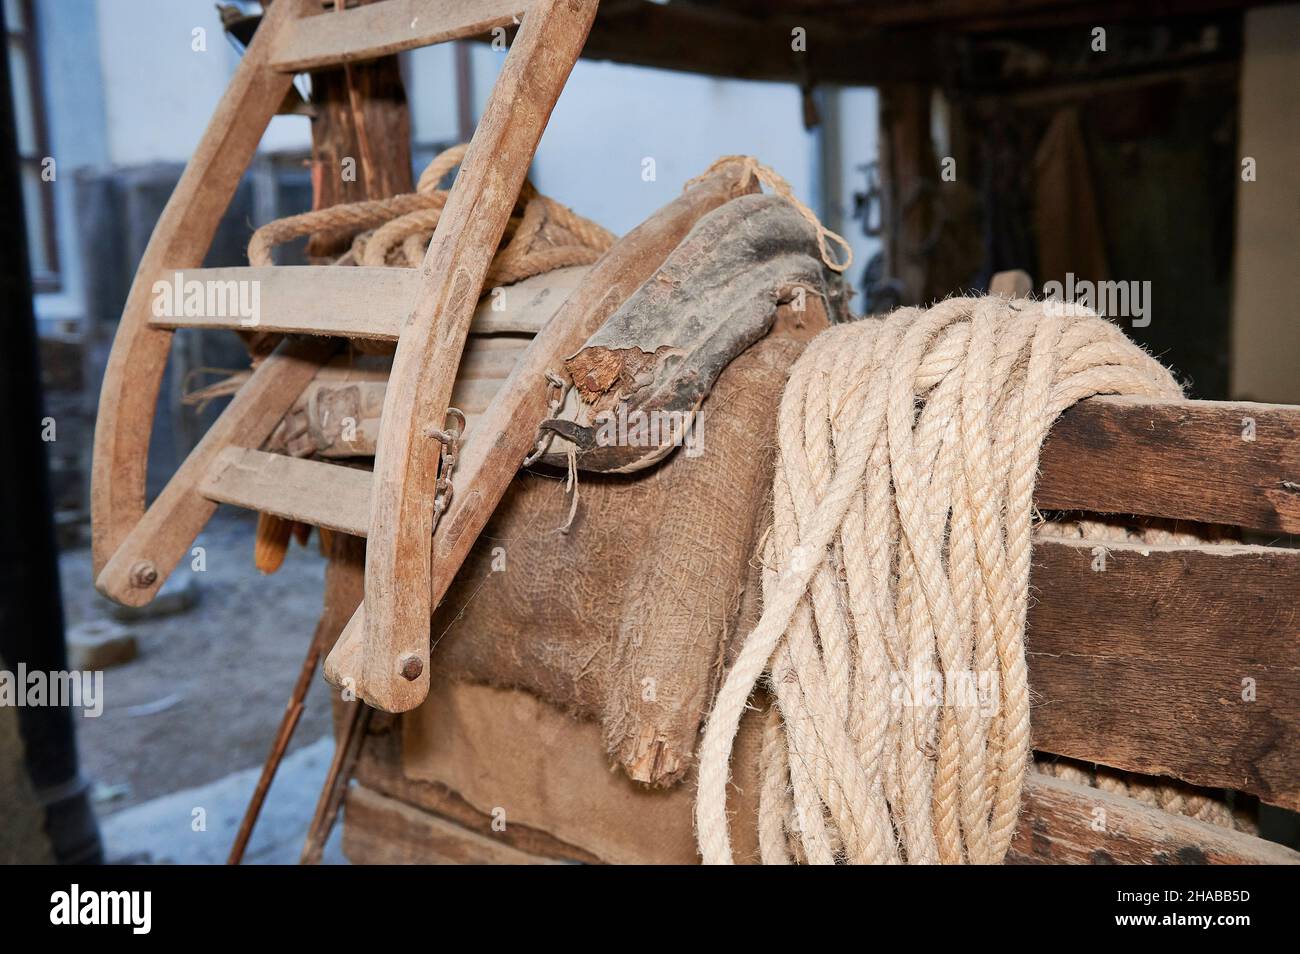 hemp rope coiled on old wooden boards in a farmhouse interior Stock Photo